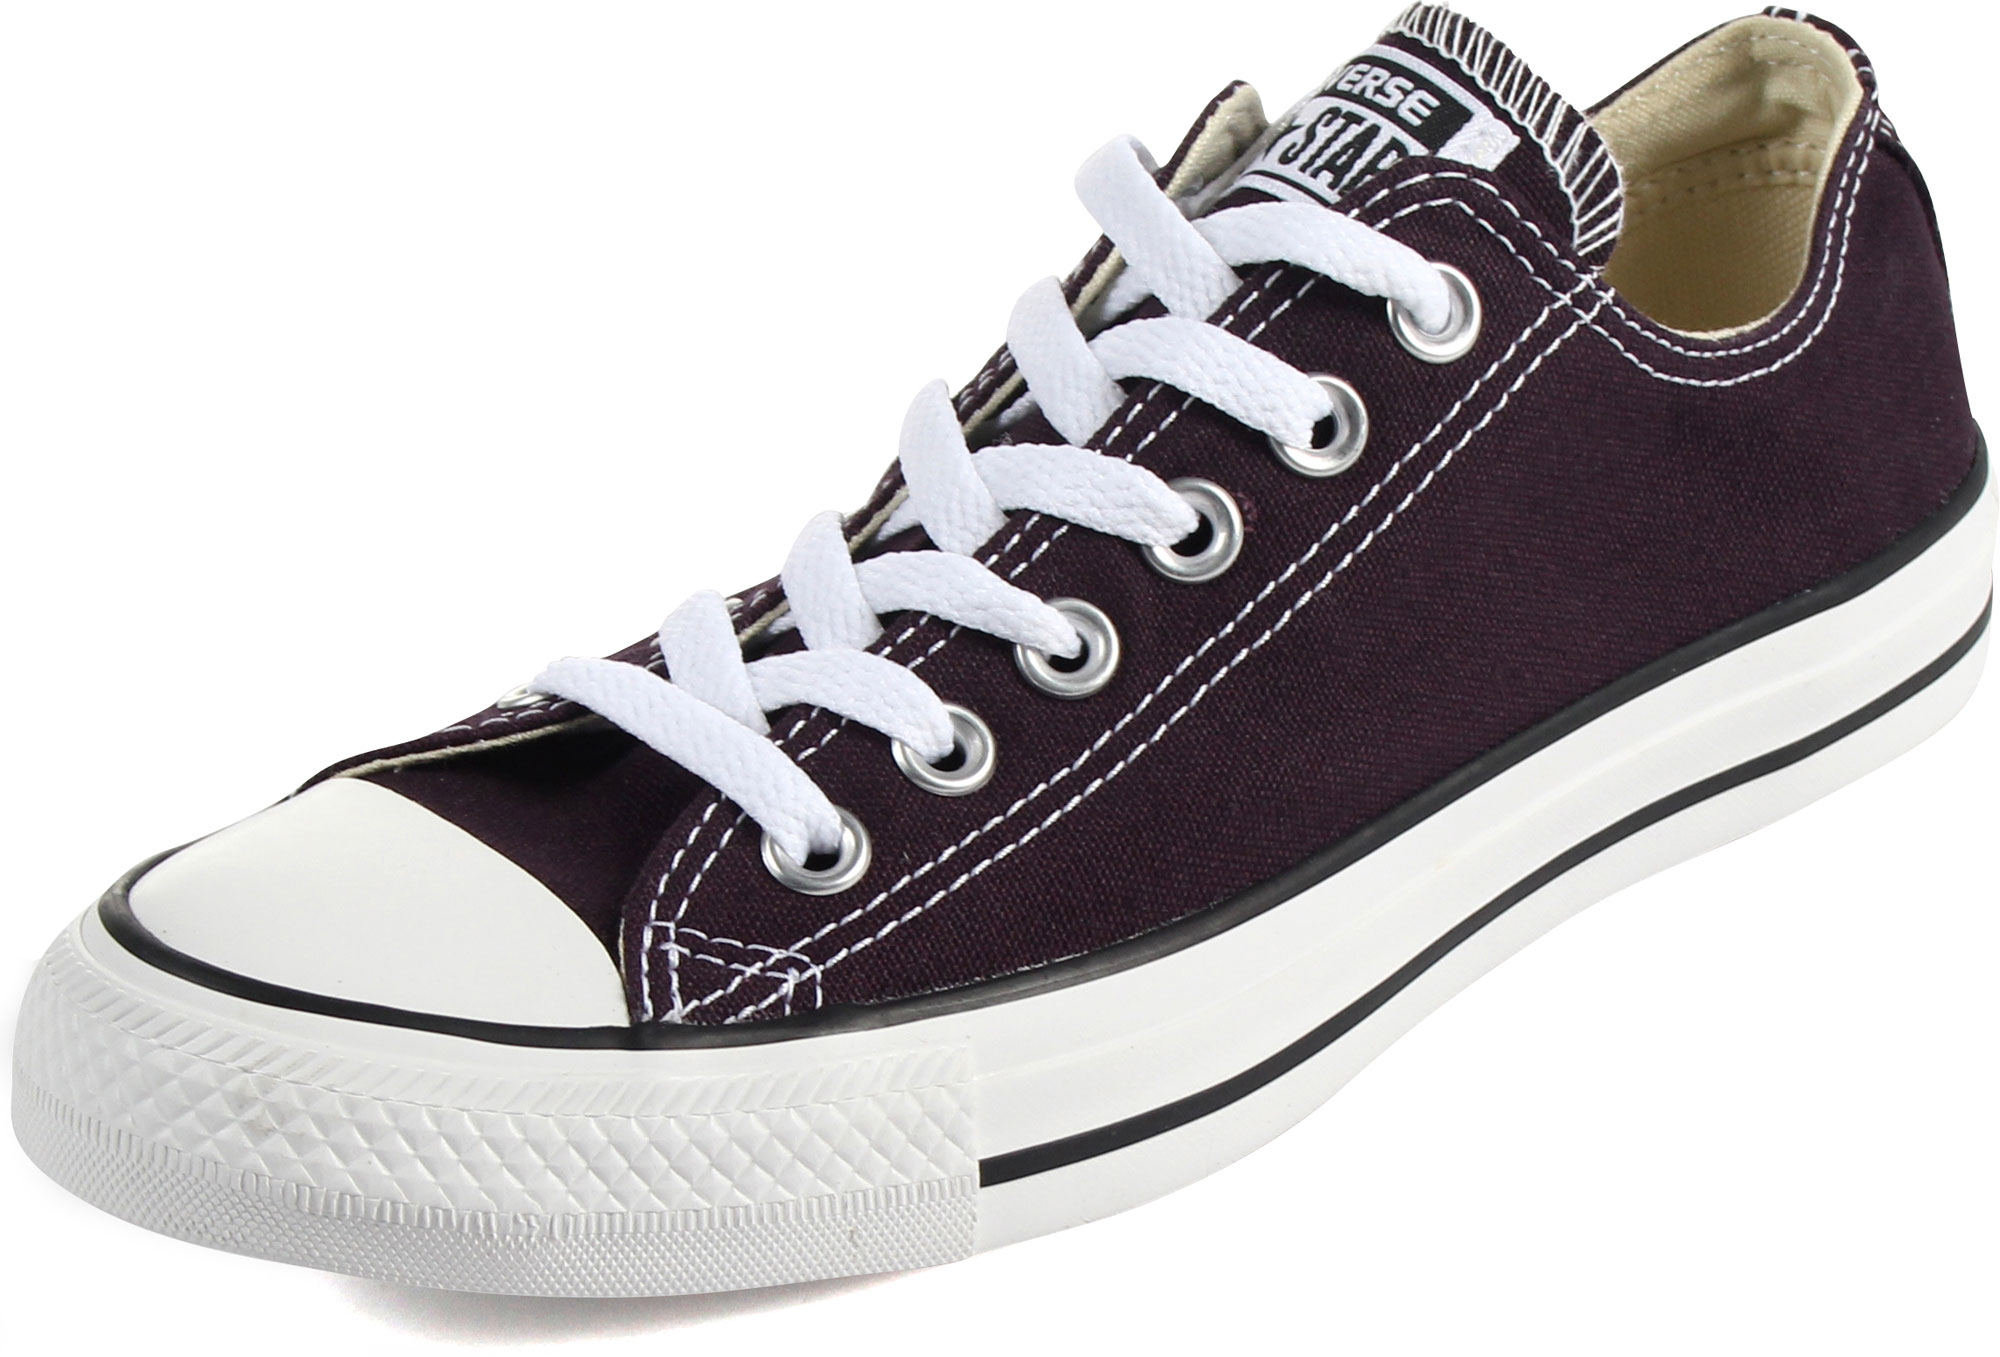 never Prophet Survive Converse Chuck Taylor All Star Shoes (M9166) Low top in Black